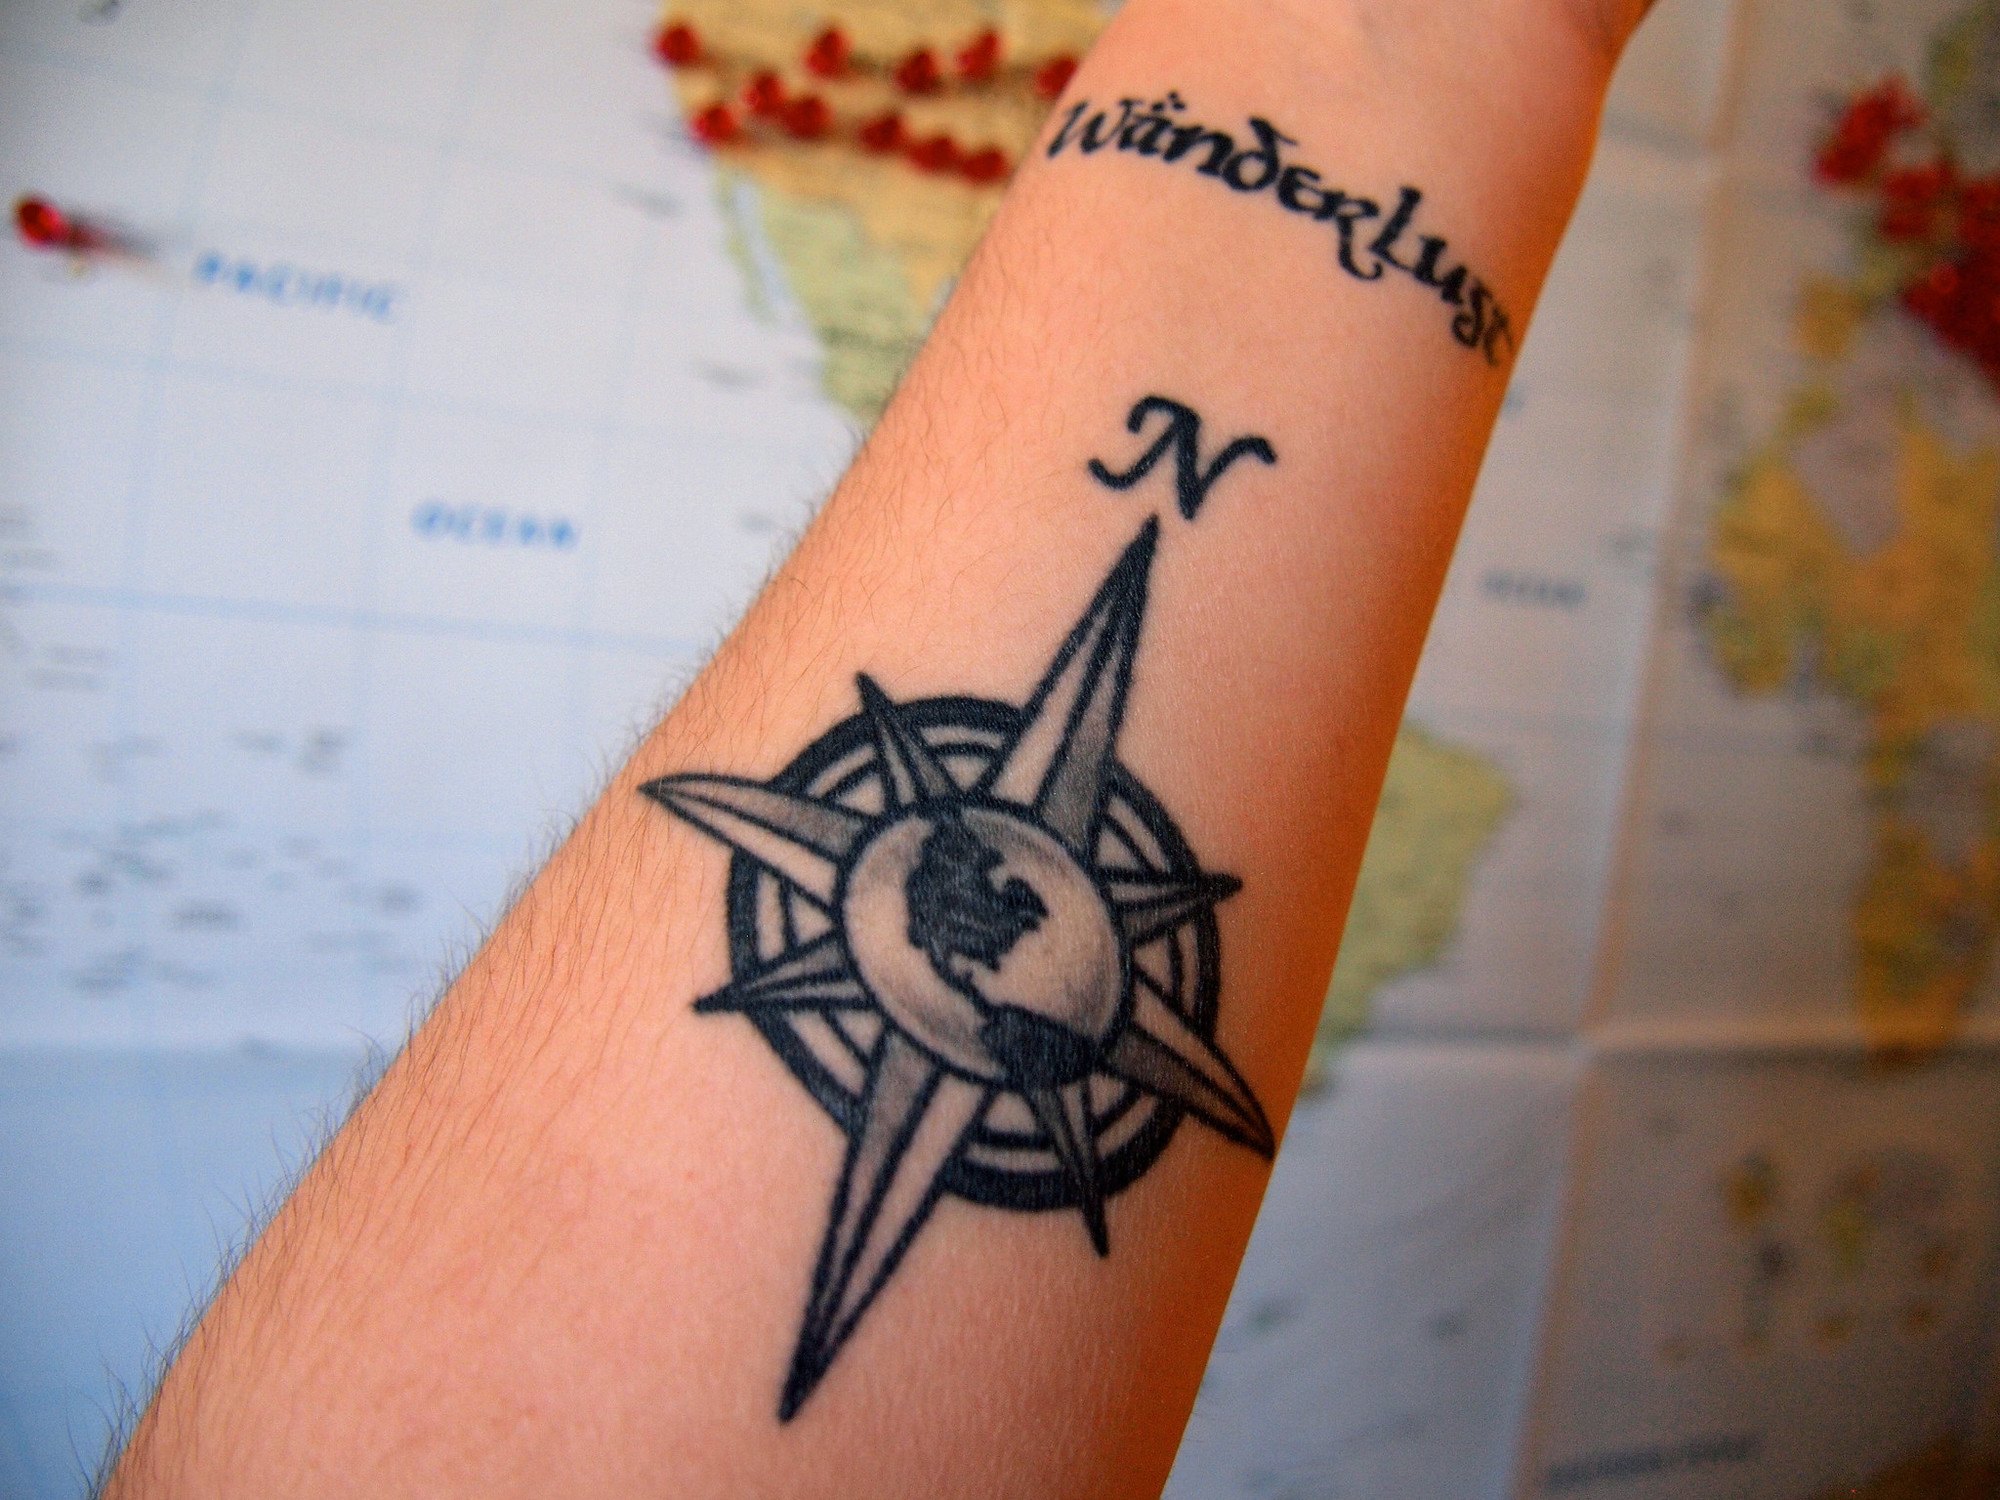 My Travel Tattoos and Their Stories